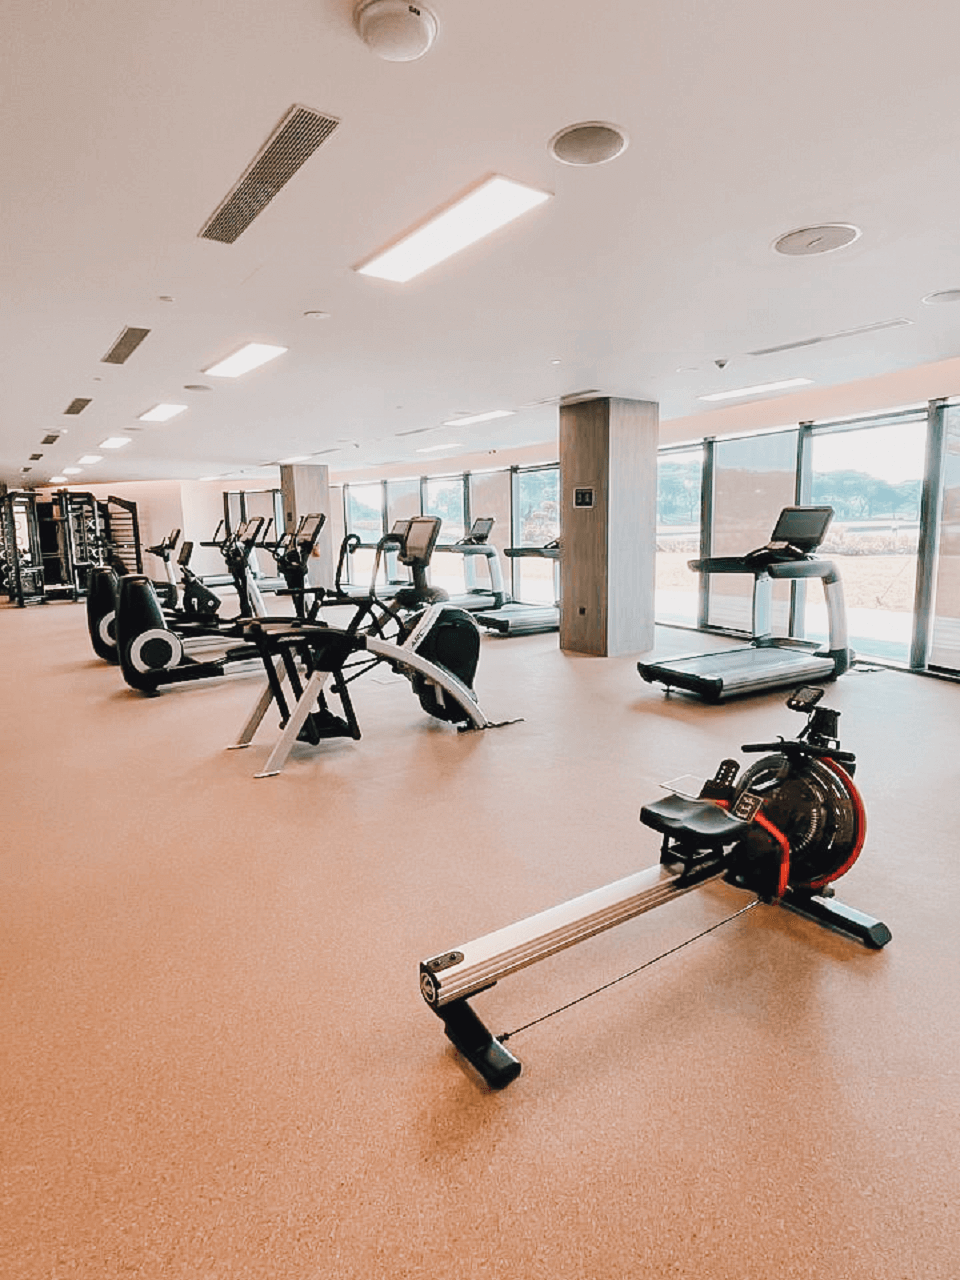  gym for staycay in dusit thani singapore 